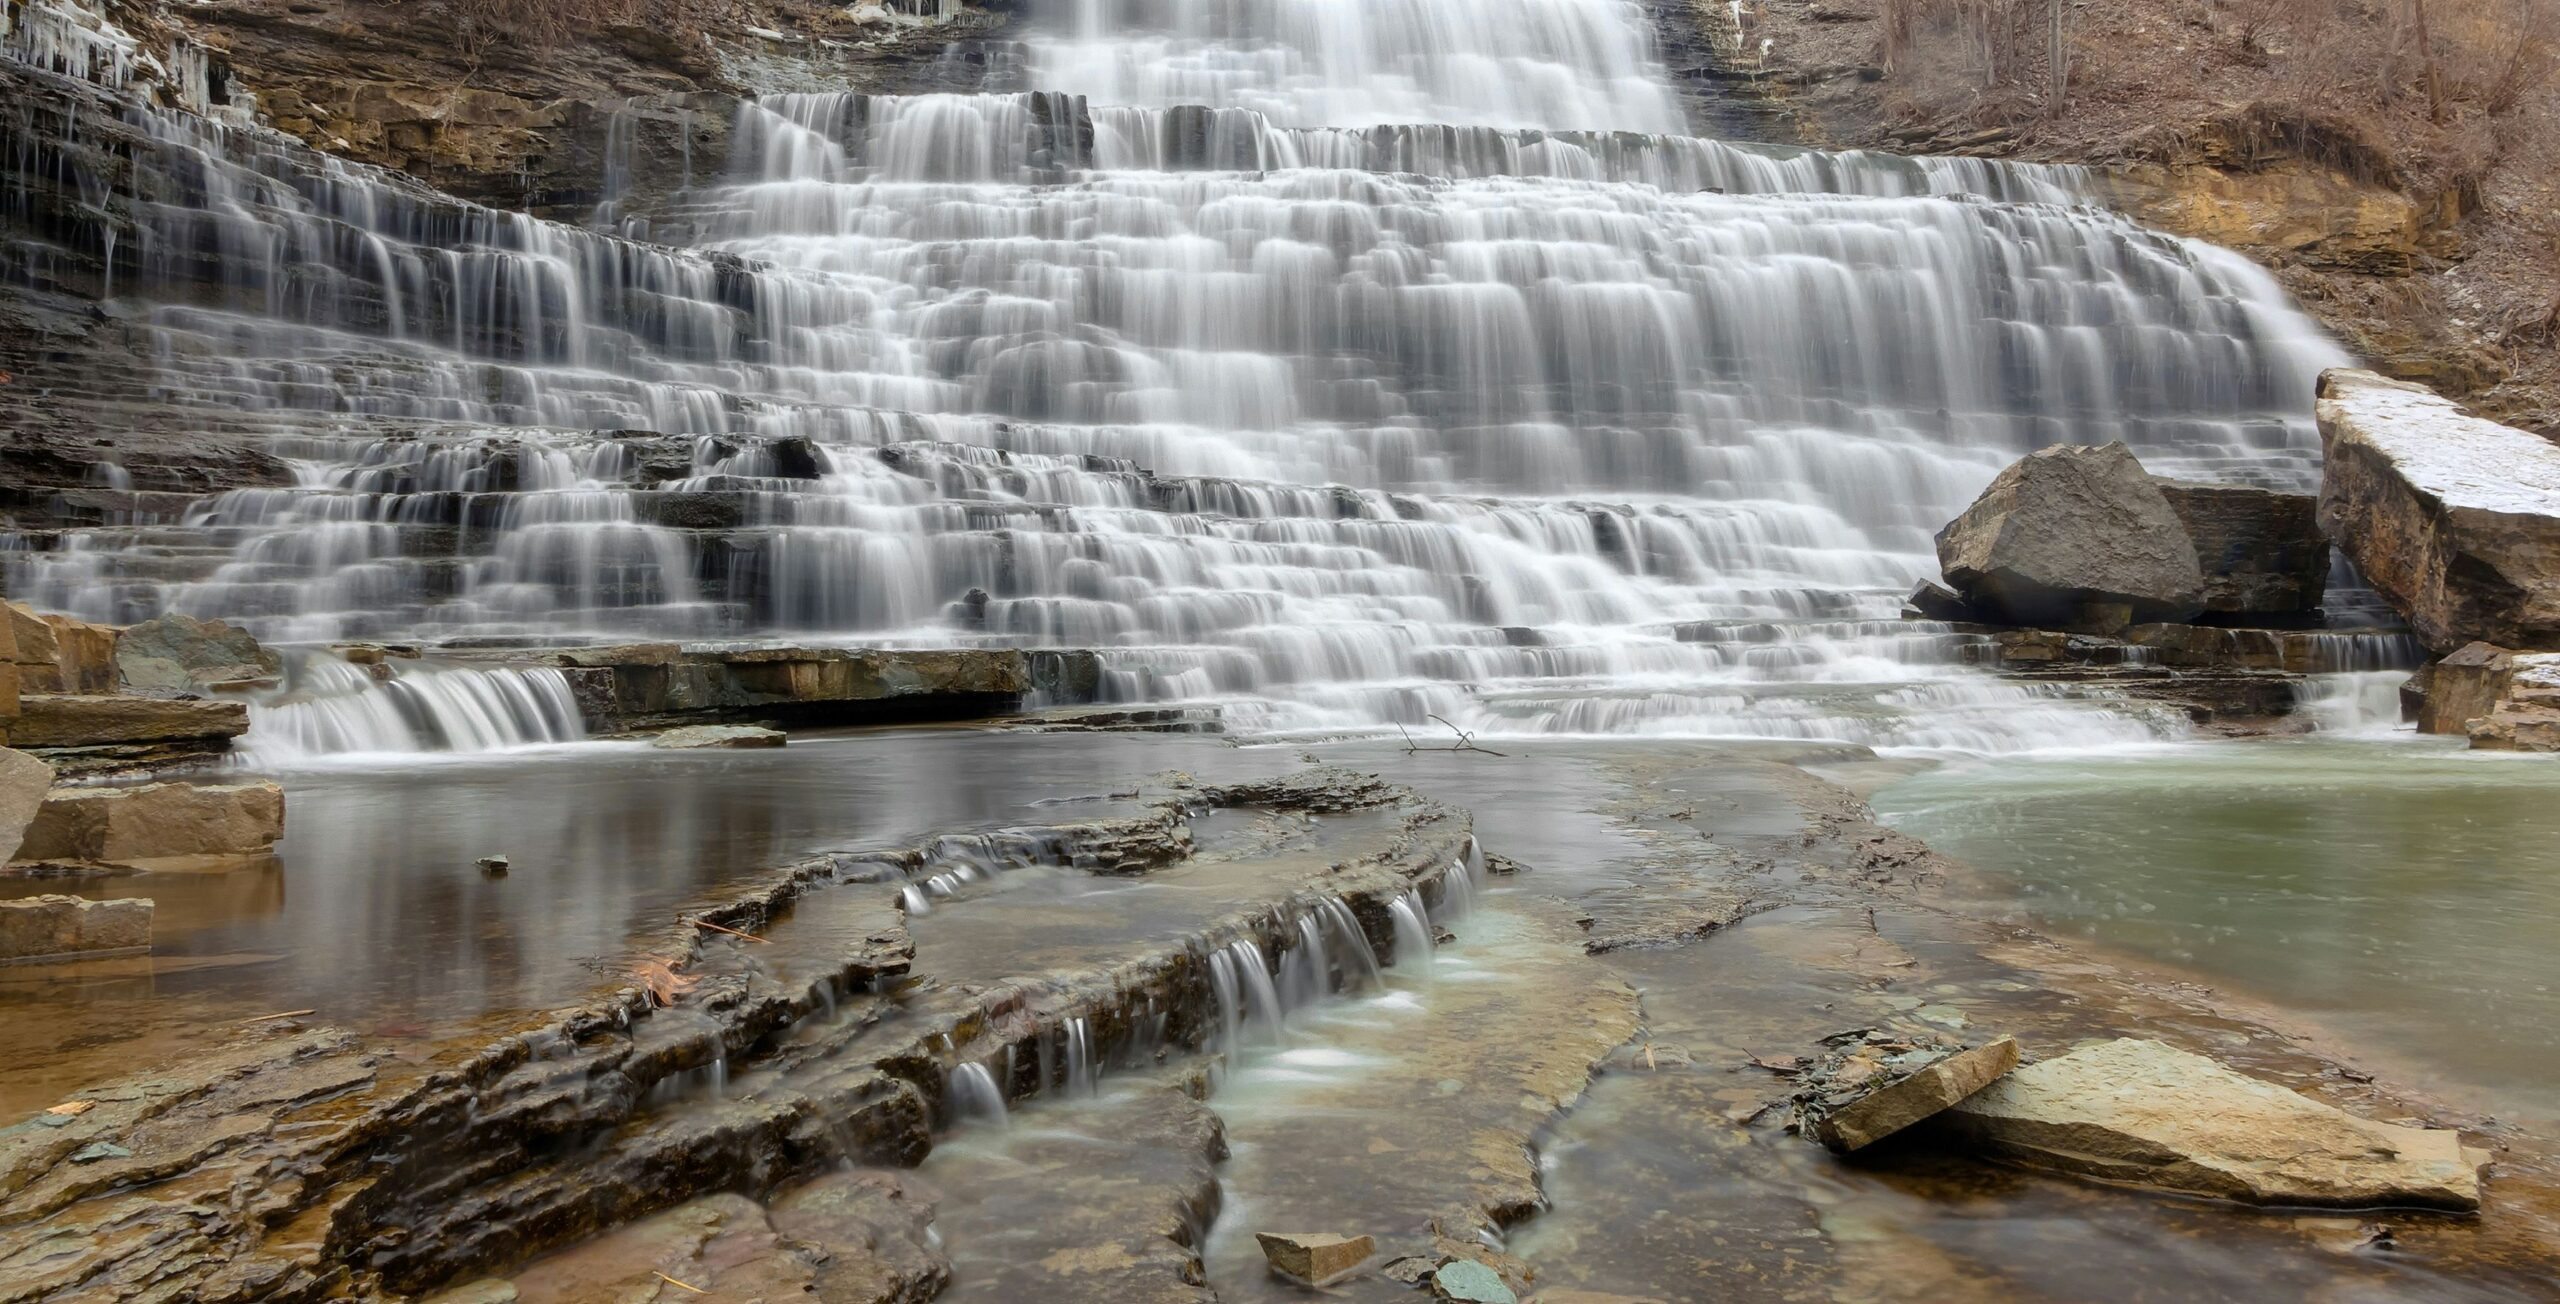 What To Do in Hamilton: The City of Waterfalls